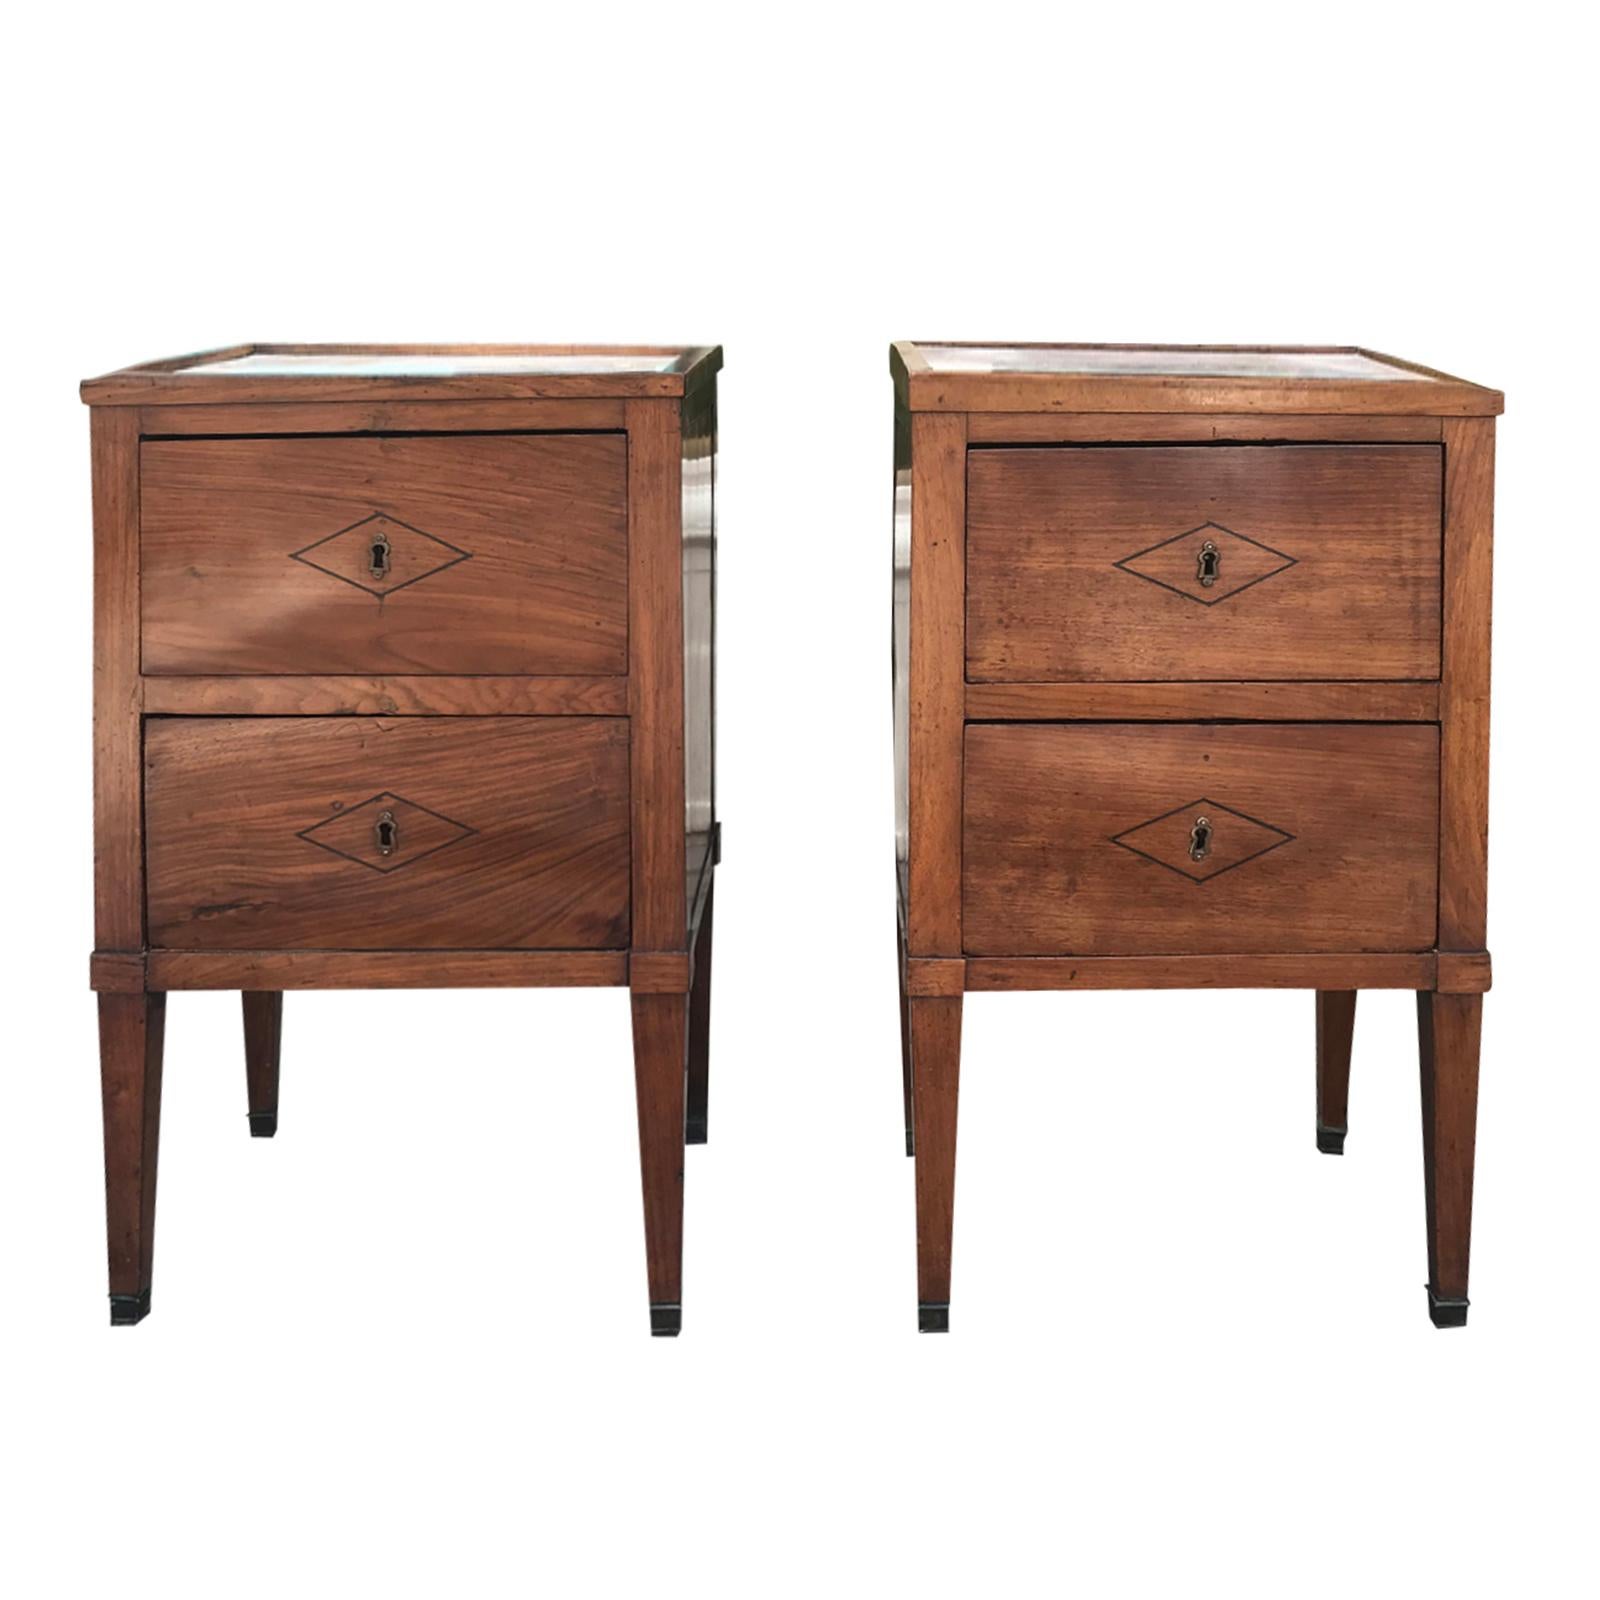 Pair of Italian Neoclassical Two-Drawer Bedside Commodes with Inset Marble